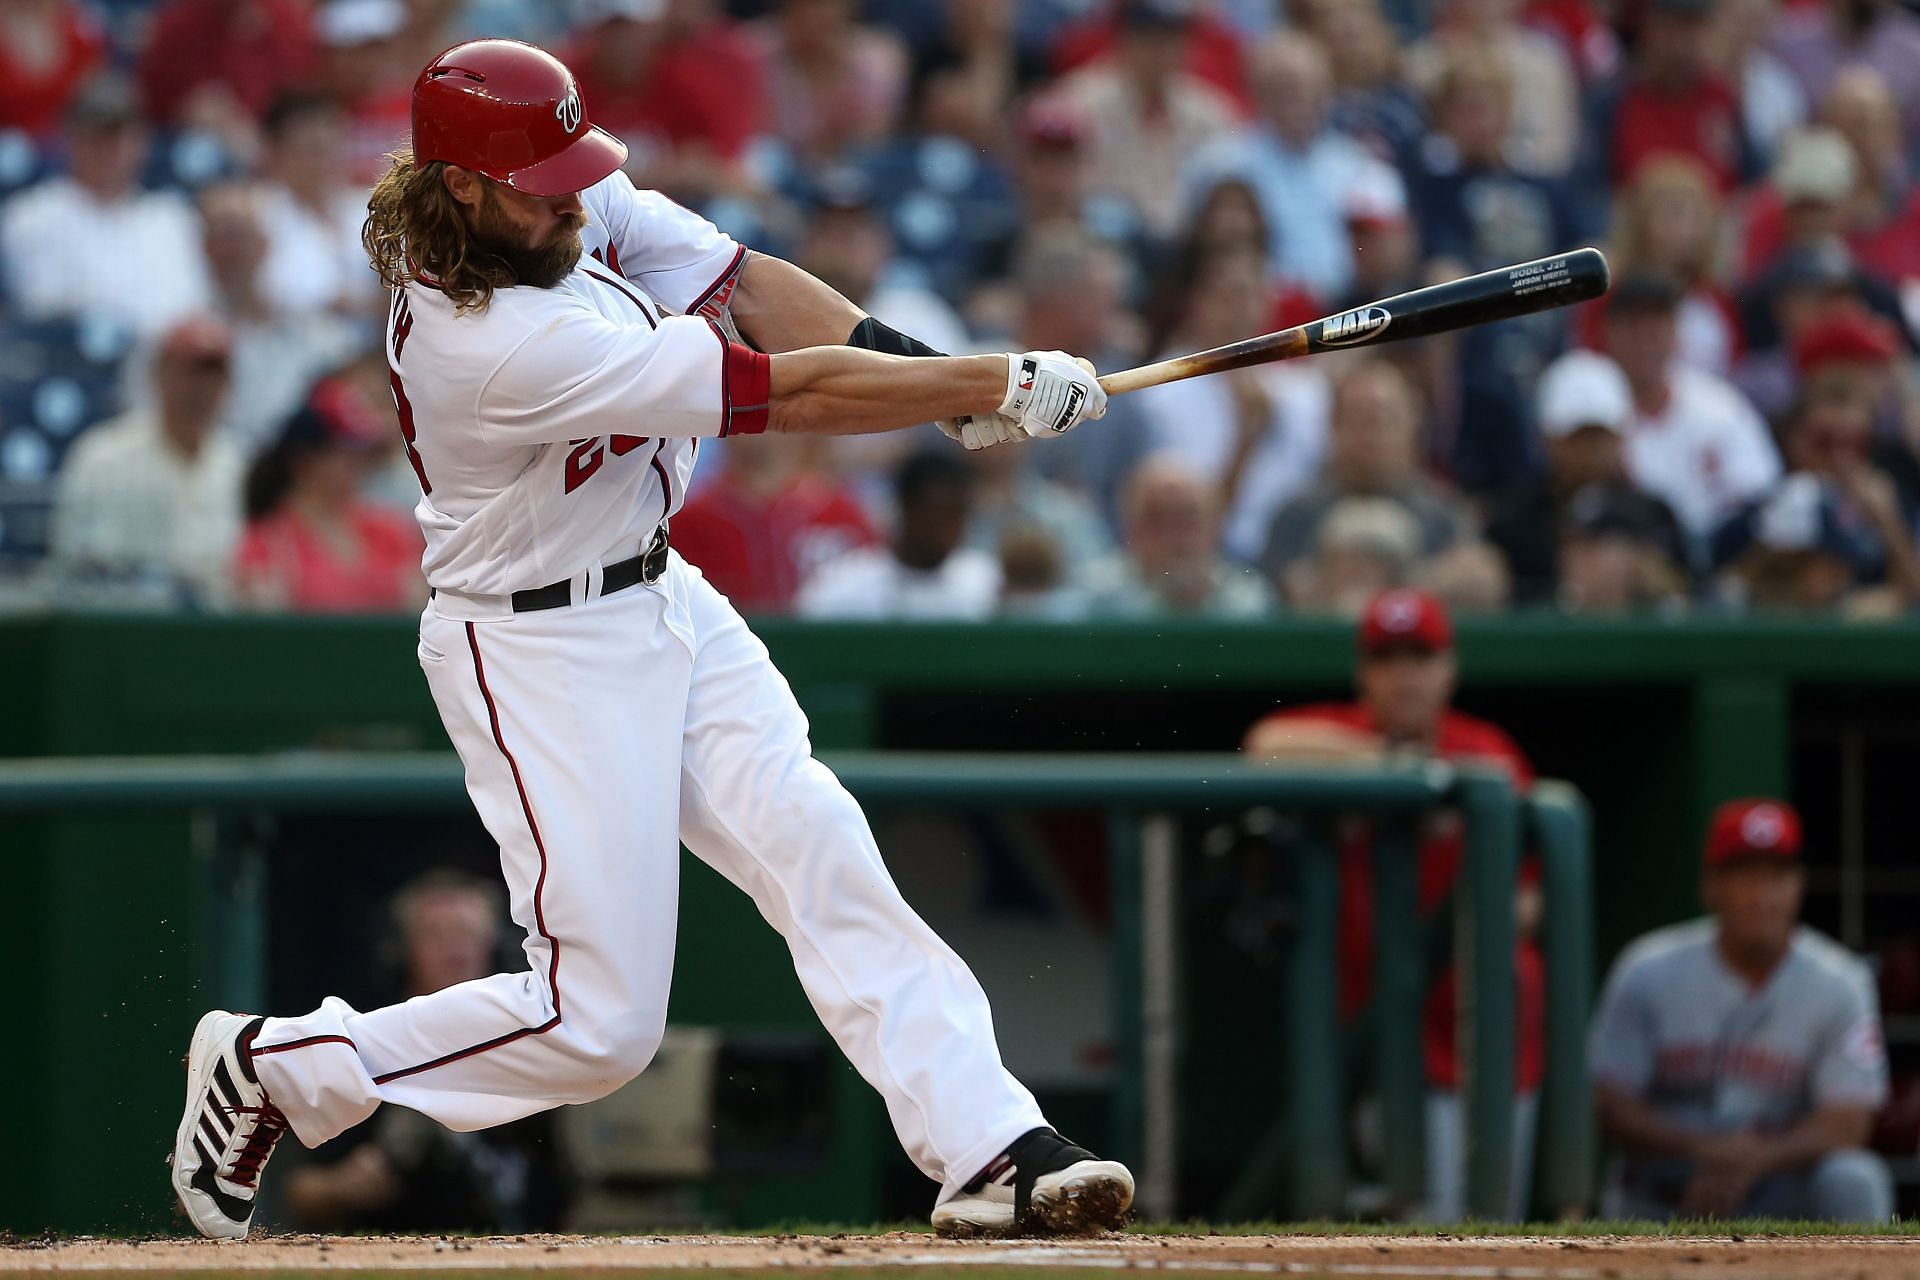 Jayson Werth of the Washington Nationals hits a double.